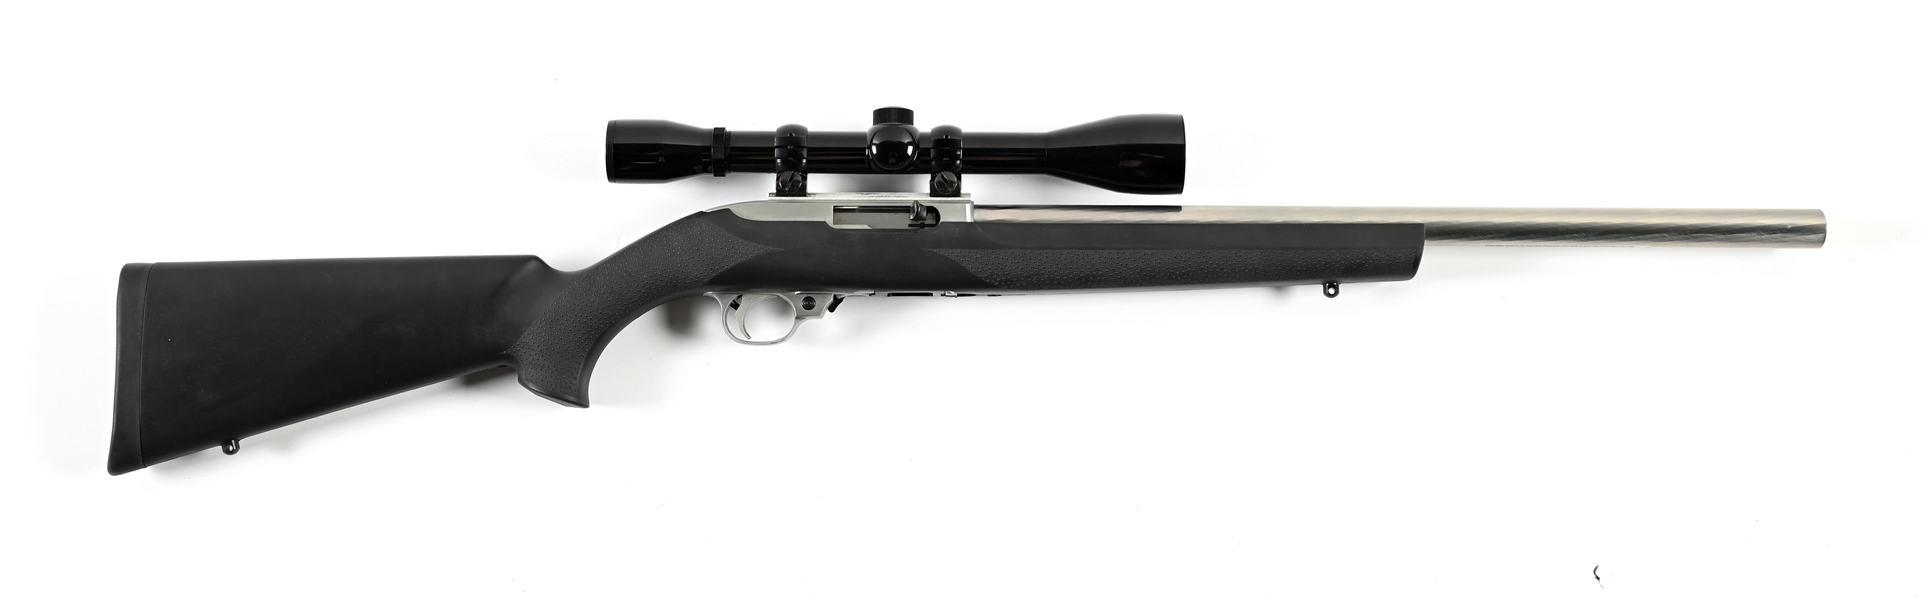 (M) STAINLESS HEAVY BARRELED RUGER 10/22 SEMI AUTOMATIC RIFLE WITH SCOPE.